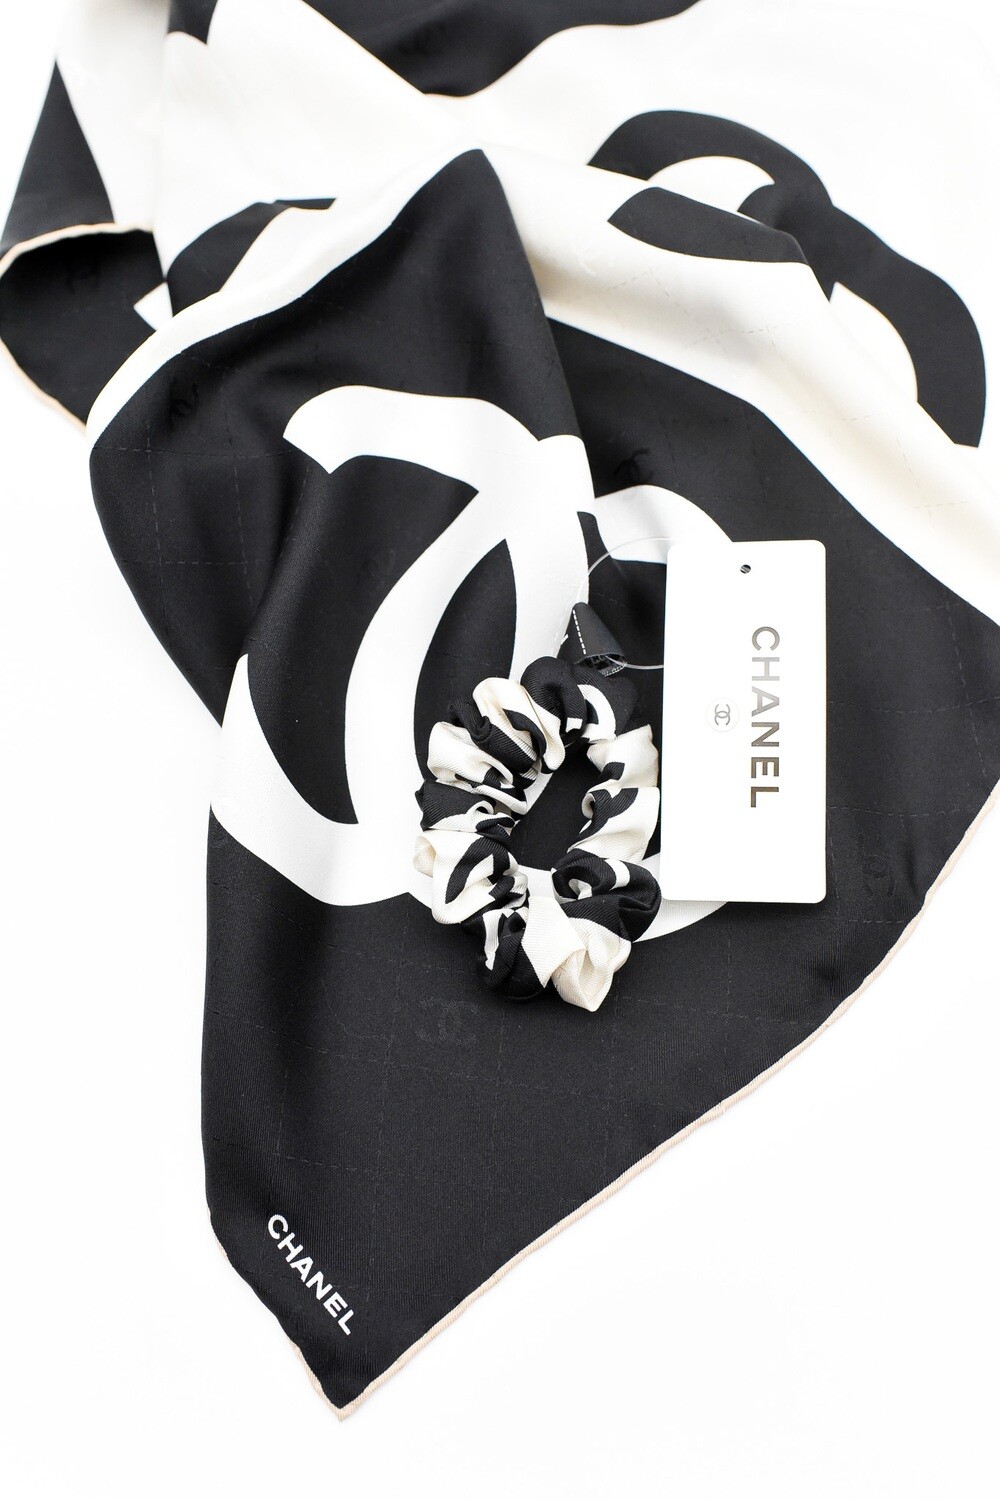 Chanel Hair Tie Scarf, Black and White Silk, New in Box WA001